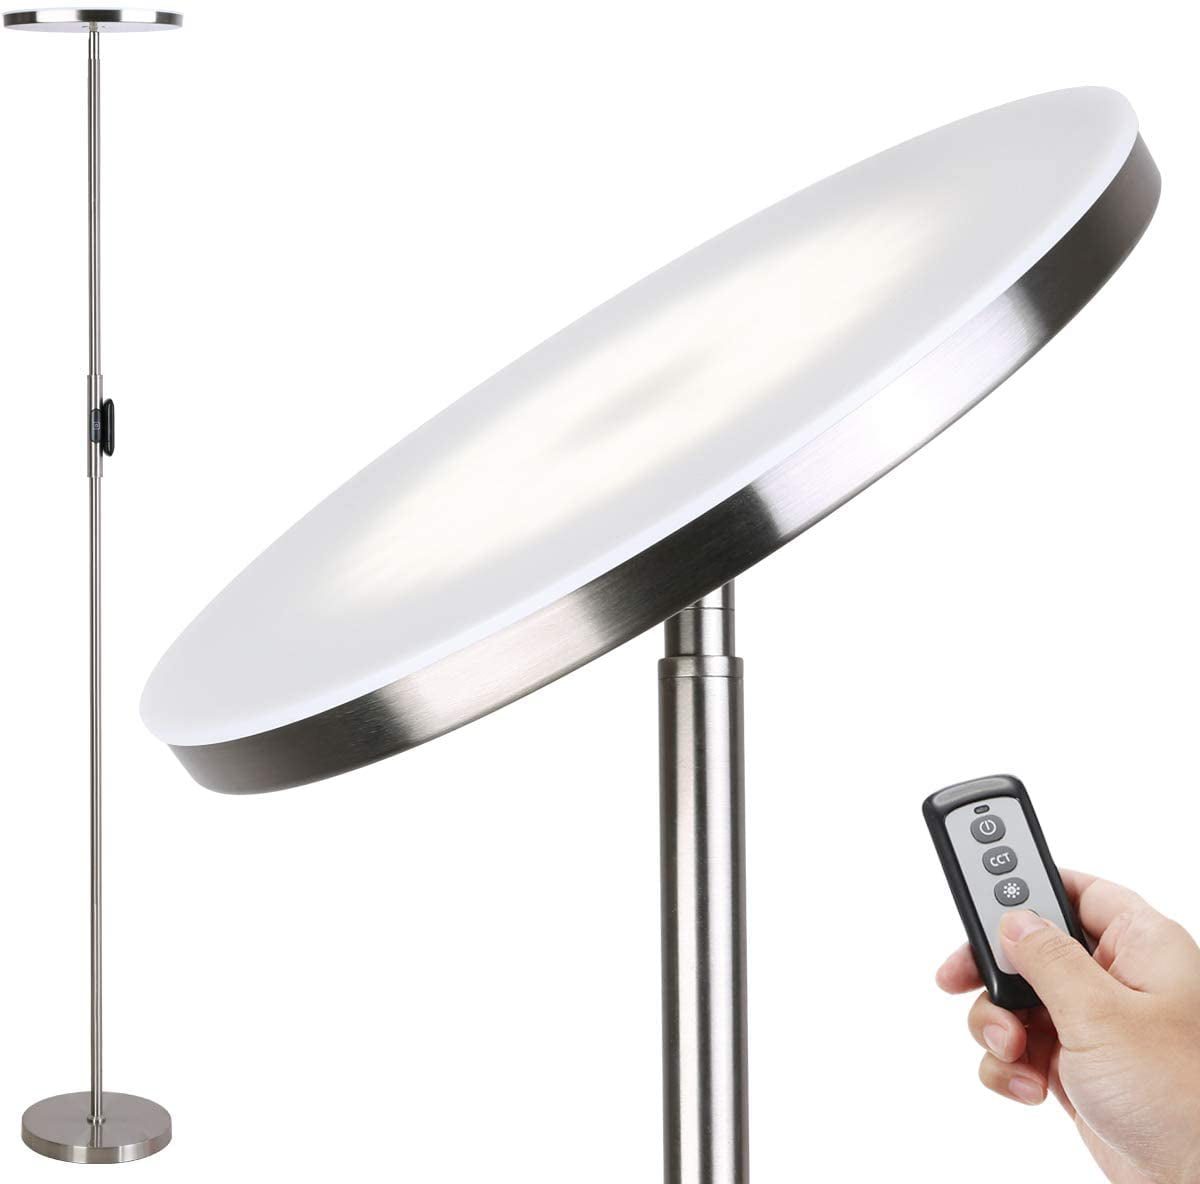 JOOFO Floor Lamp,30W/2400LM Sky LED Modern Torchiere 3 Color Temperatures Super Bright Floor